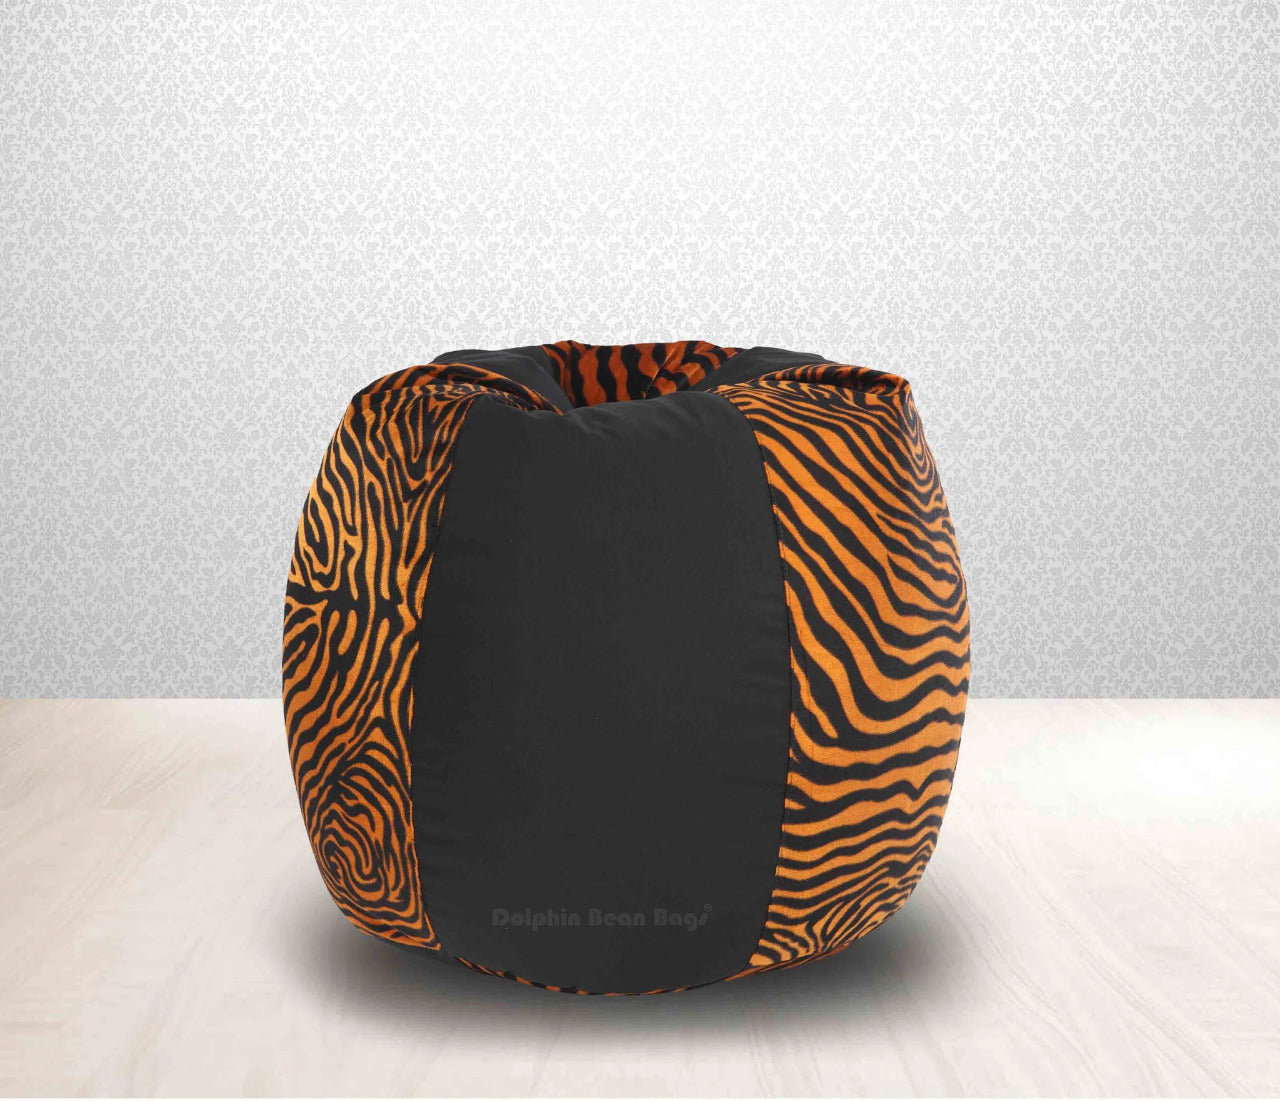 Bean Bag : XL BLACK/GOLDEN ZEBRA-FABRIC-FILLED & WASHABLE (with Beans)